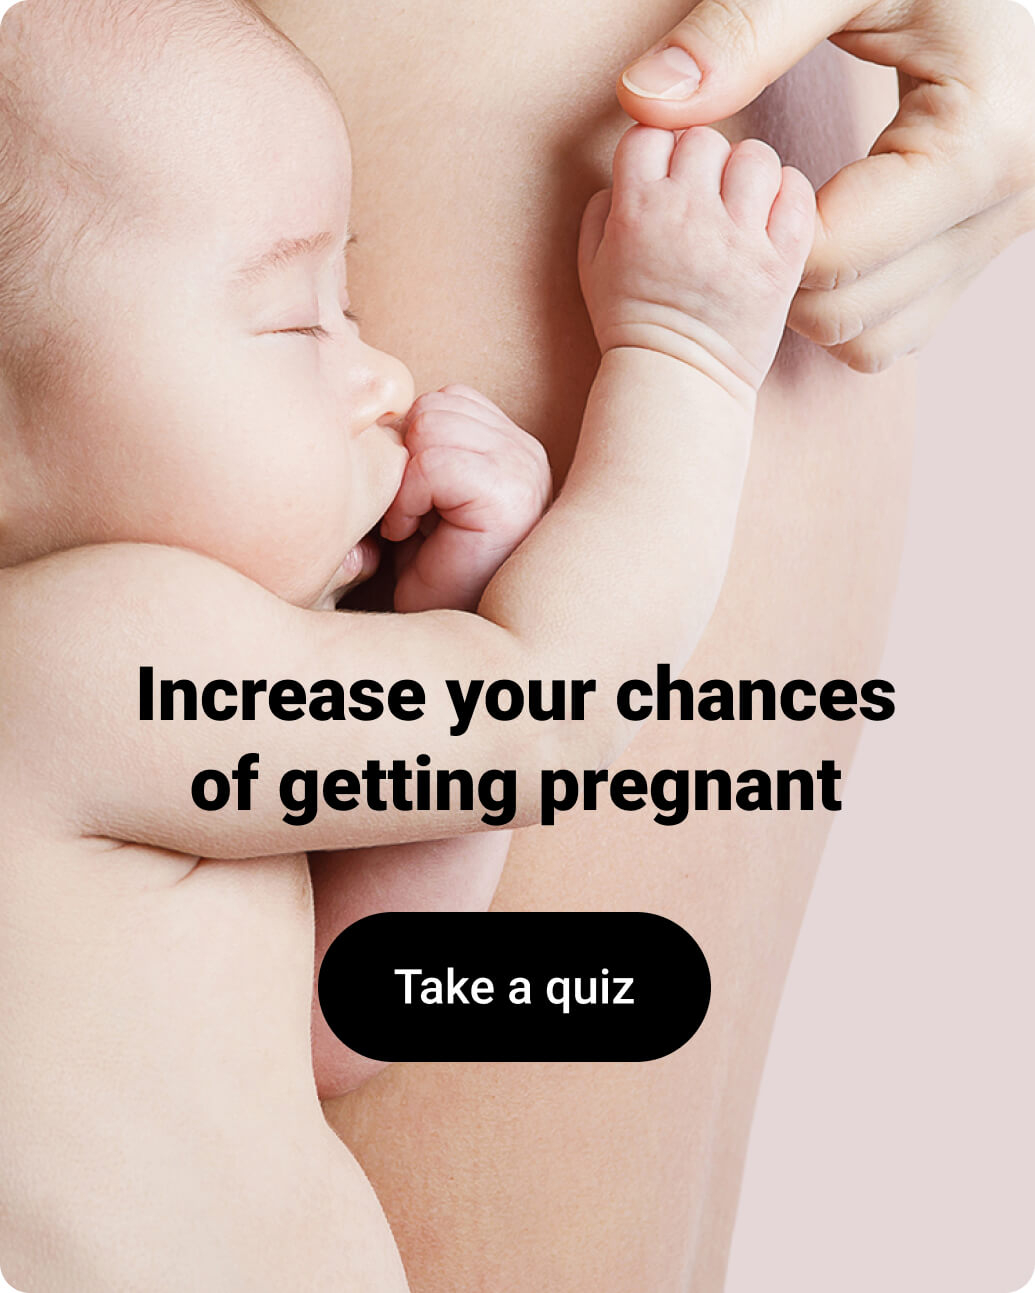 Increase your chances of getting pregnant